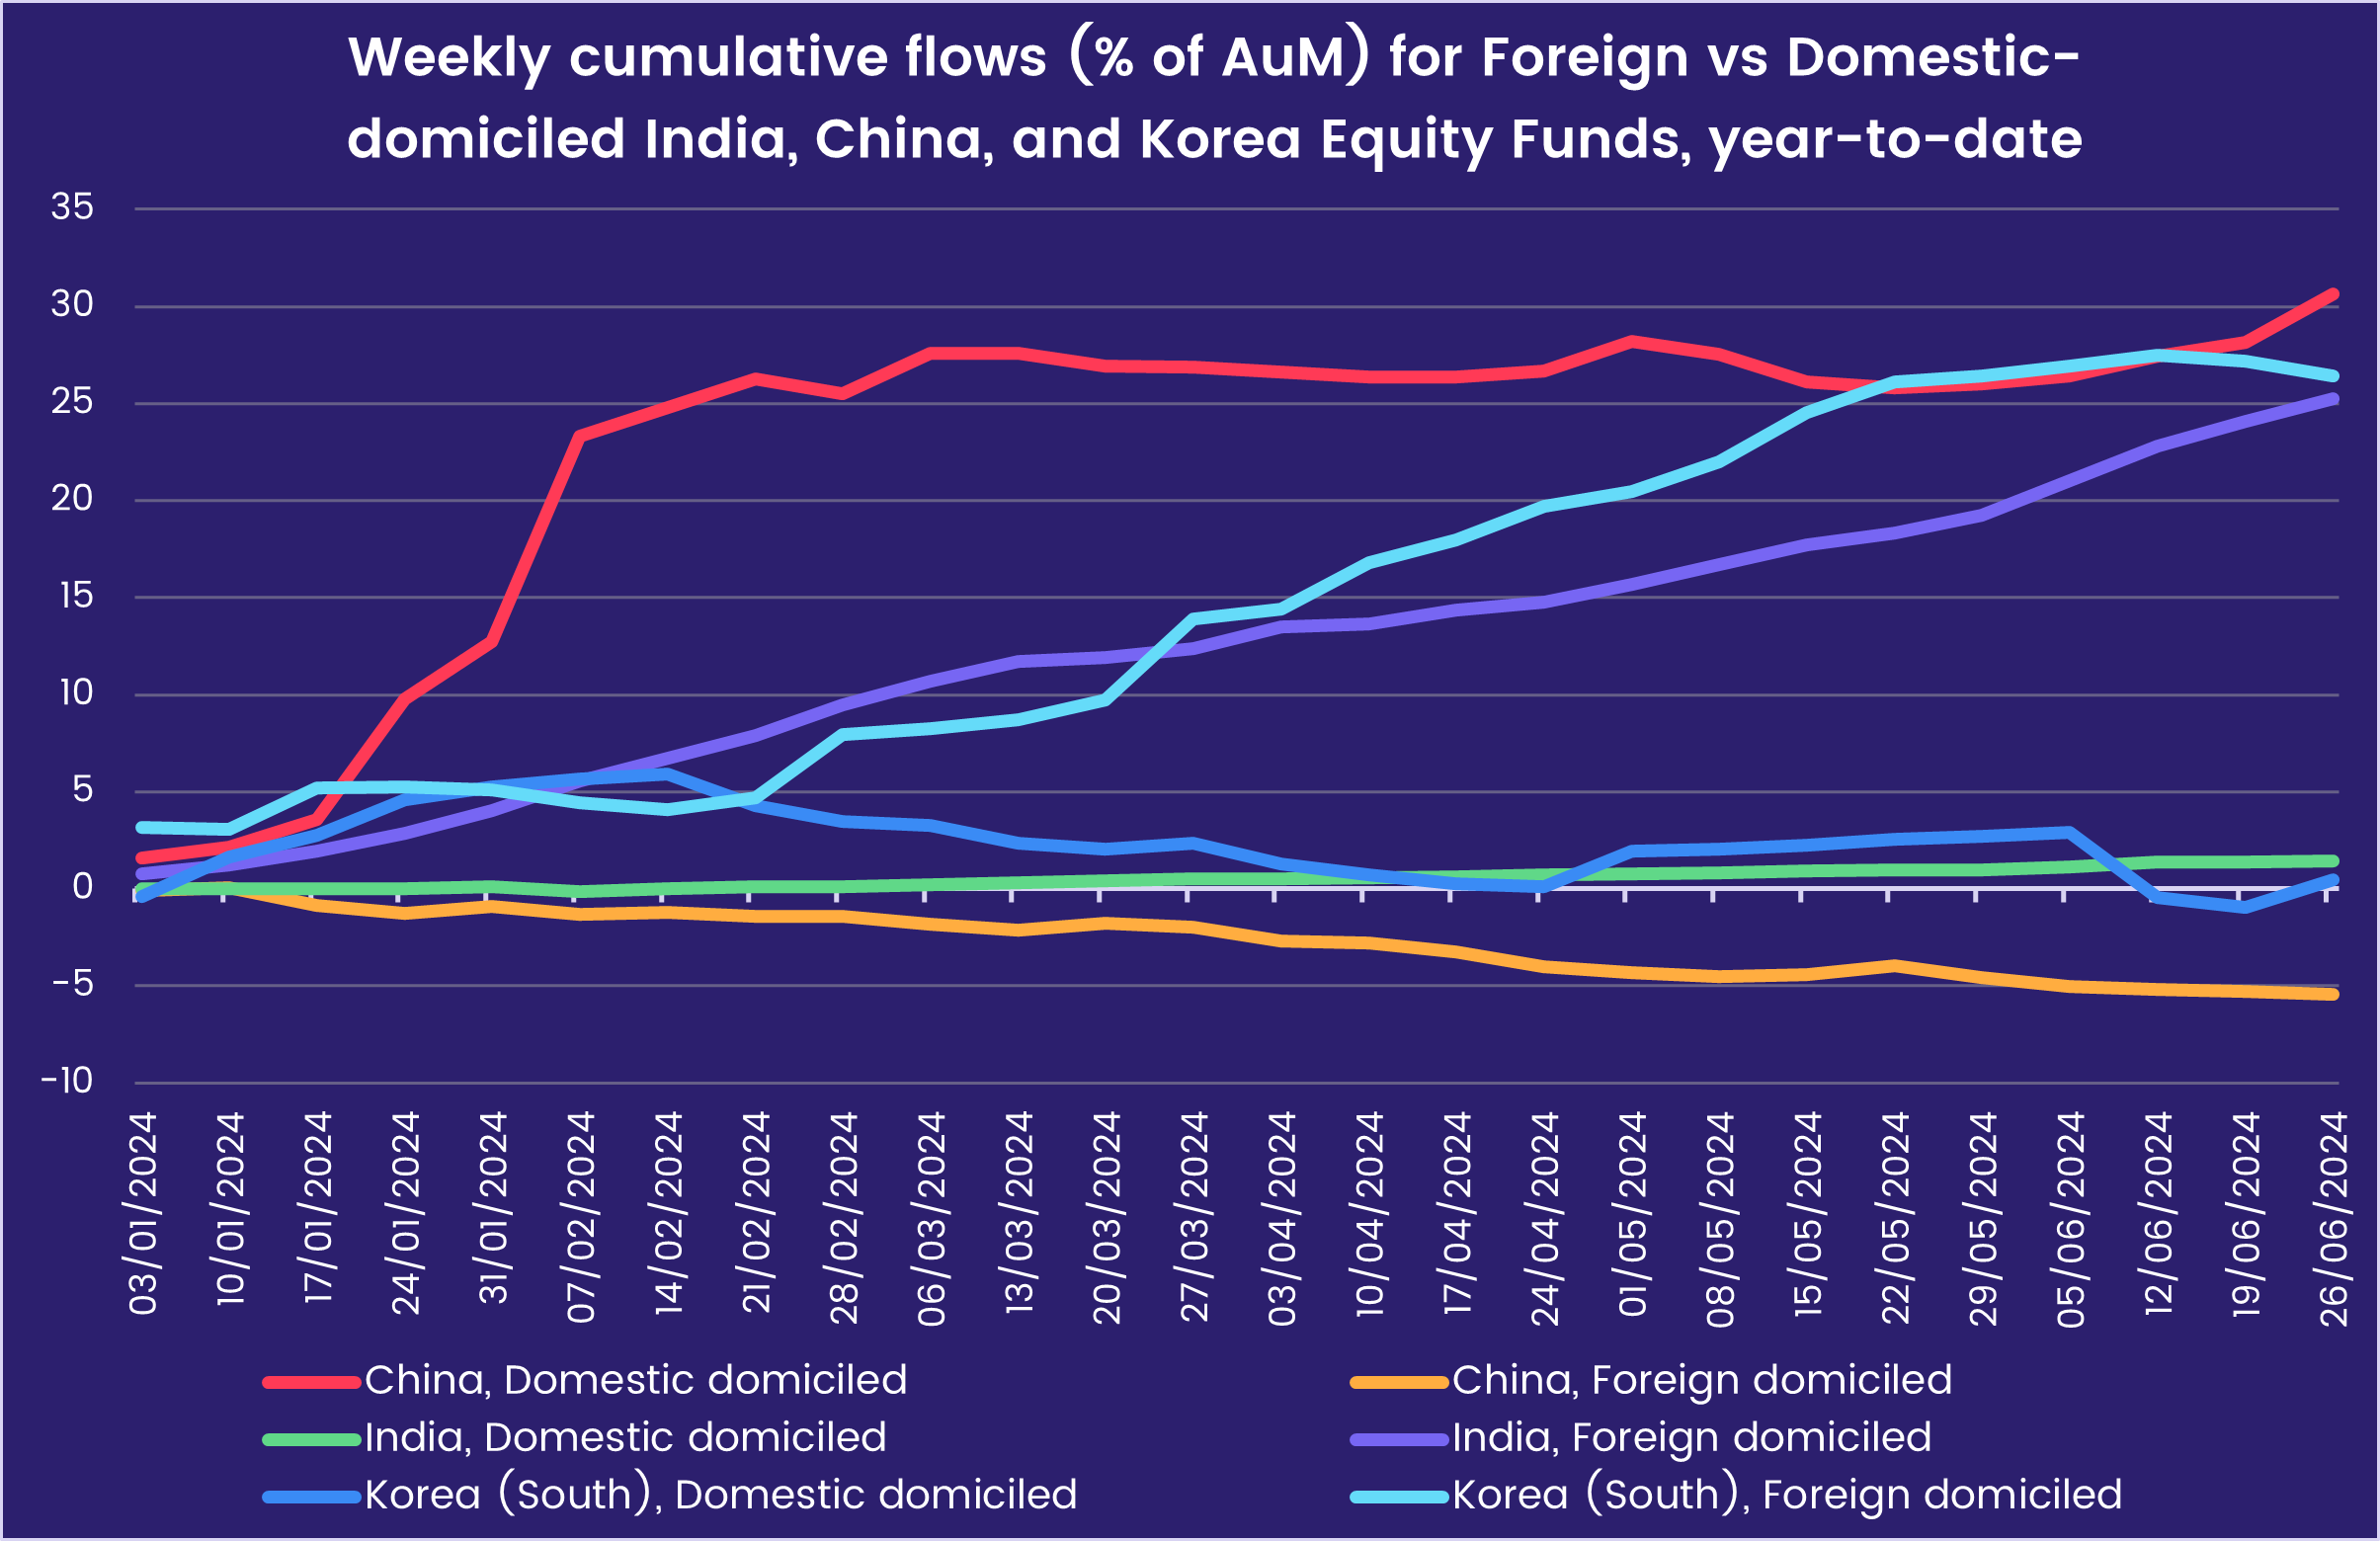 Chart representing 'Weekly cumulative flows (% of AuM) for Foreign vs Domestic-domiciled India, China, and Korea Equity Funds'